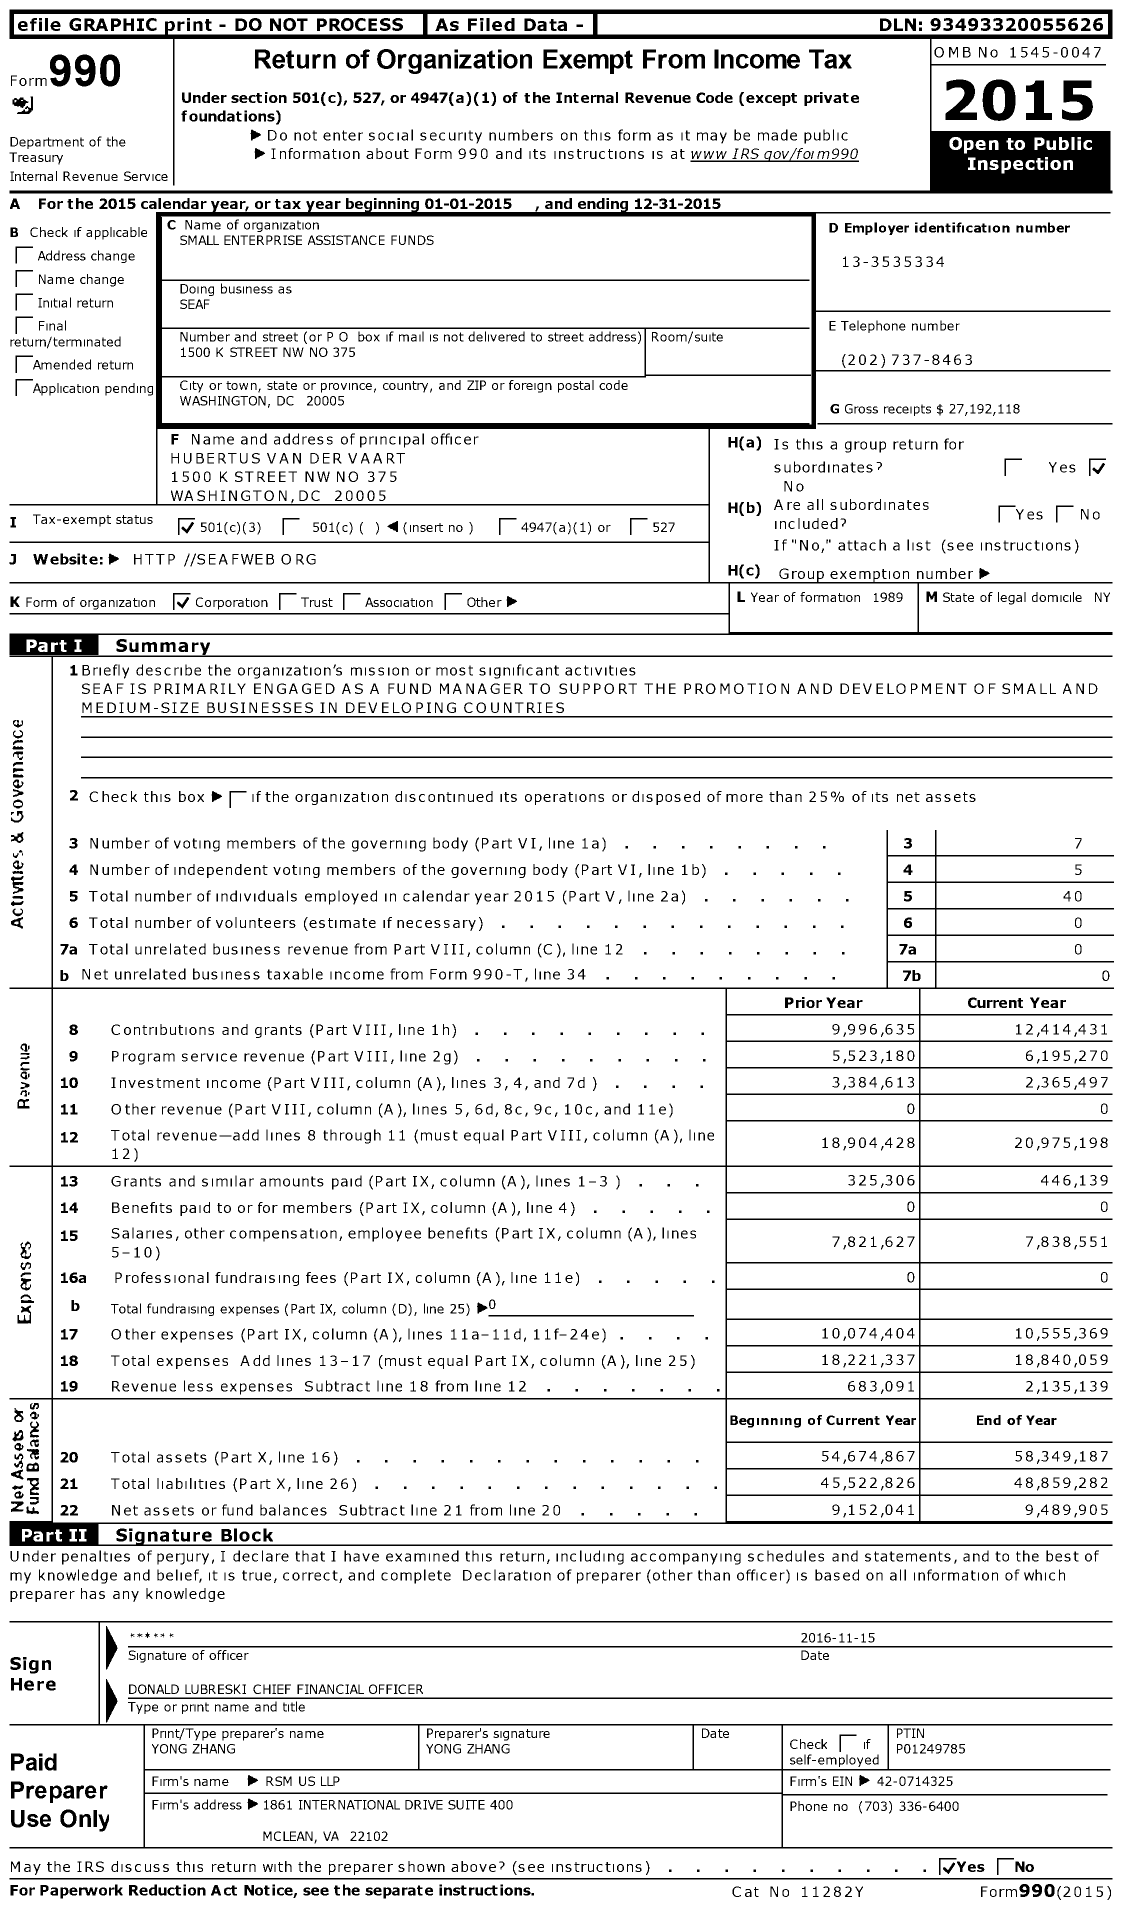 Image of first page of 2015 Form 990 for Small Enterprise Assistance Funds (SEAF)